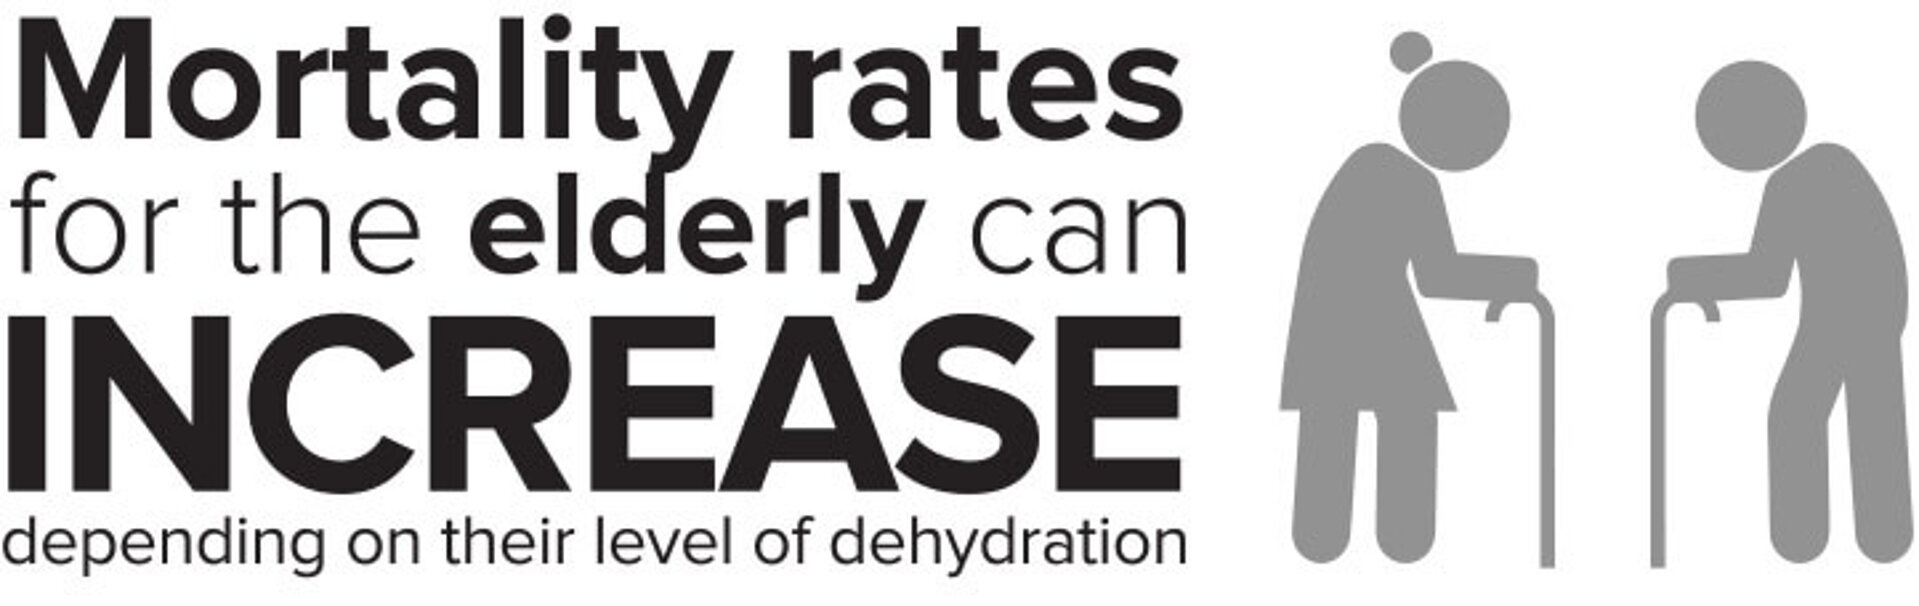 Mortality rate dehydration